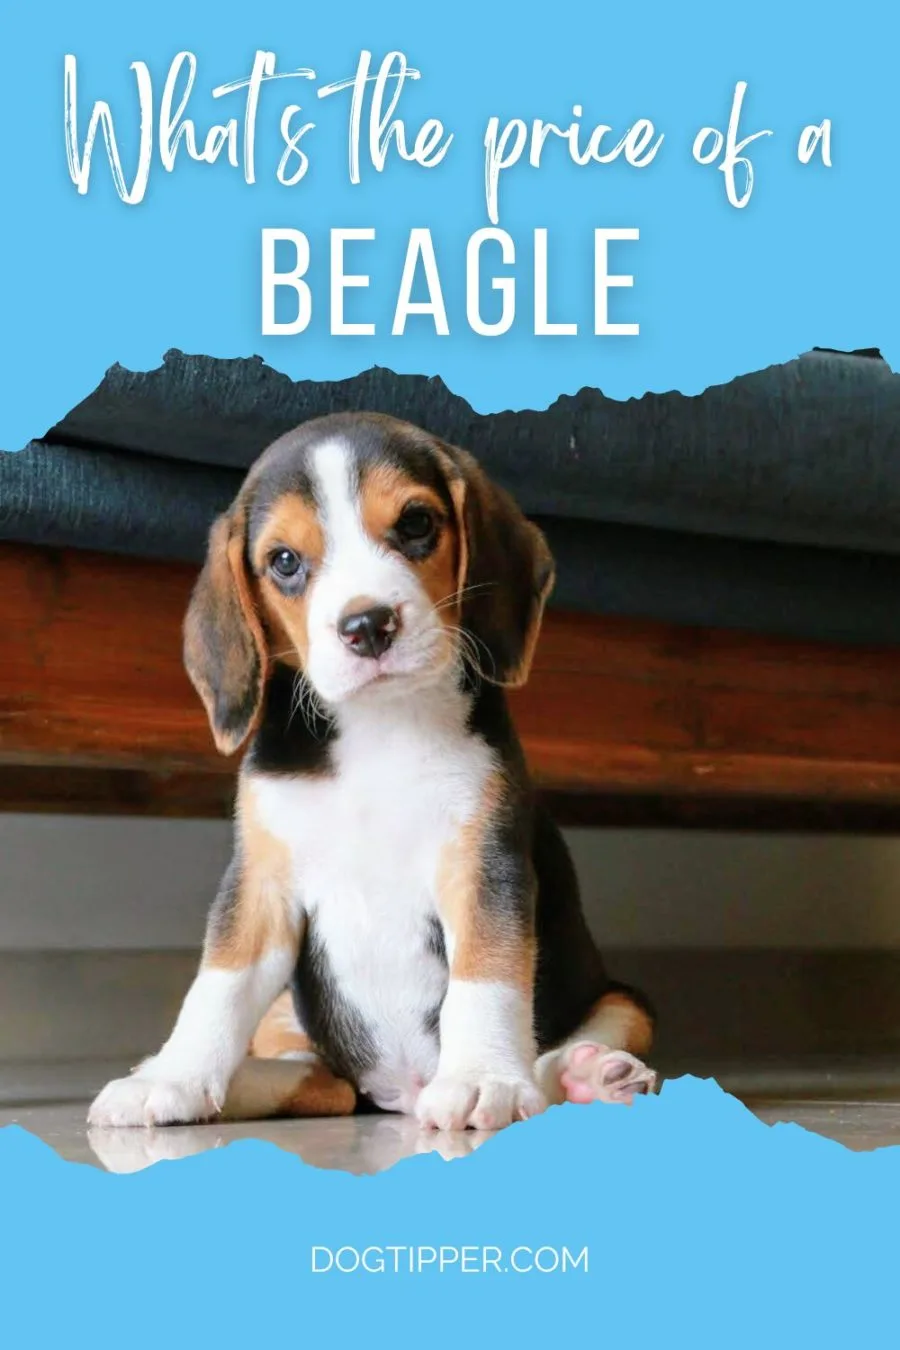 What's the price of a Beagle at a breeder, breed rescue or shelter?